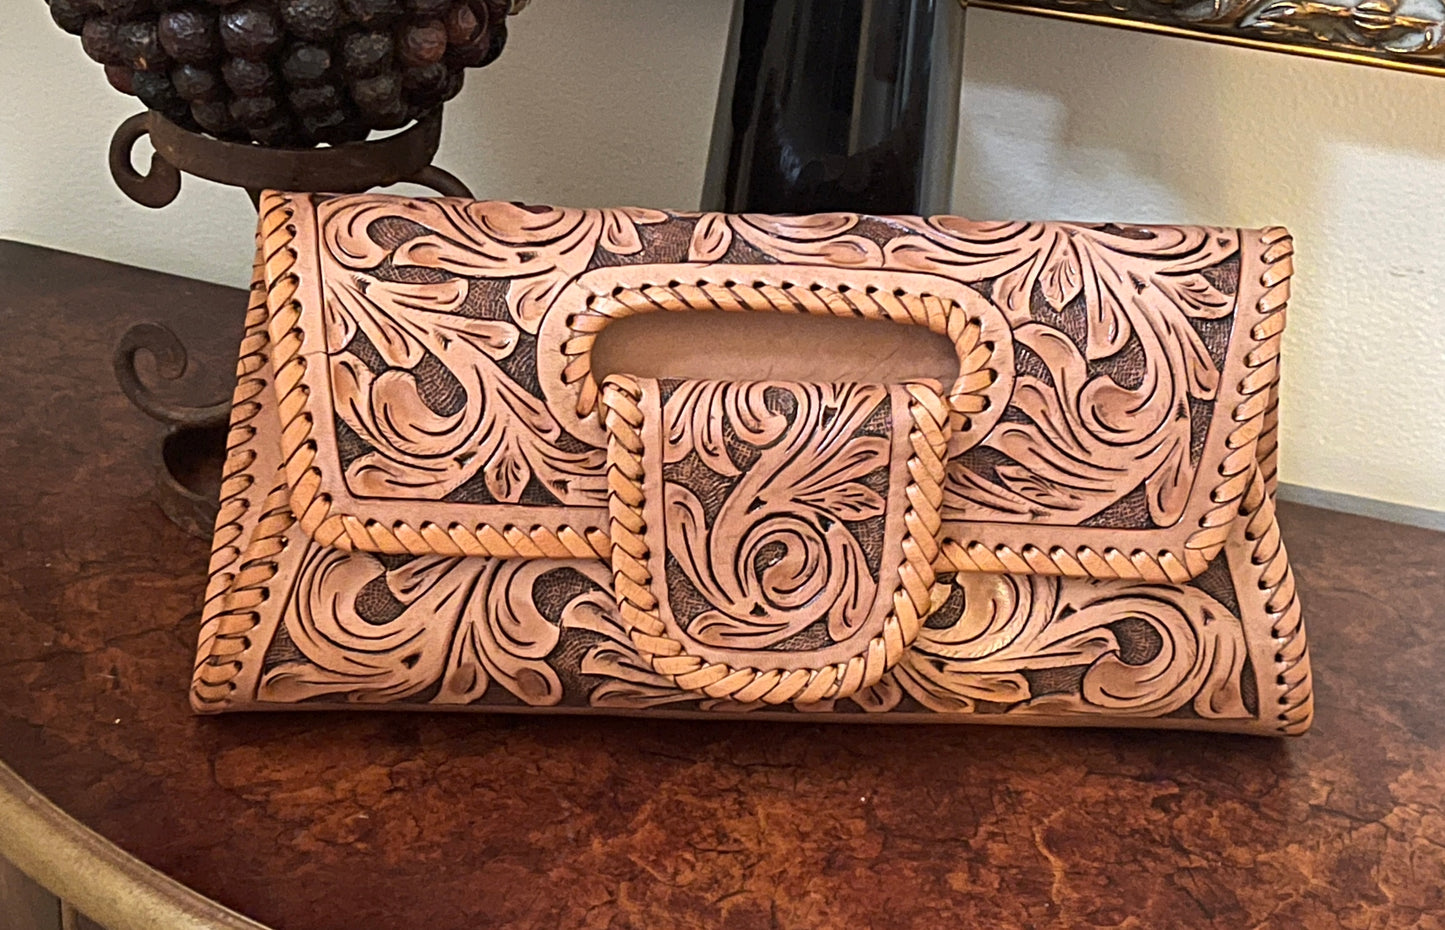 Hand-Tooled Leather Small Clutch & Crossbody "LENGUETA" by ALLE, more colors